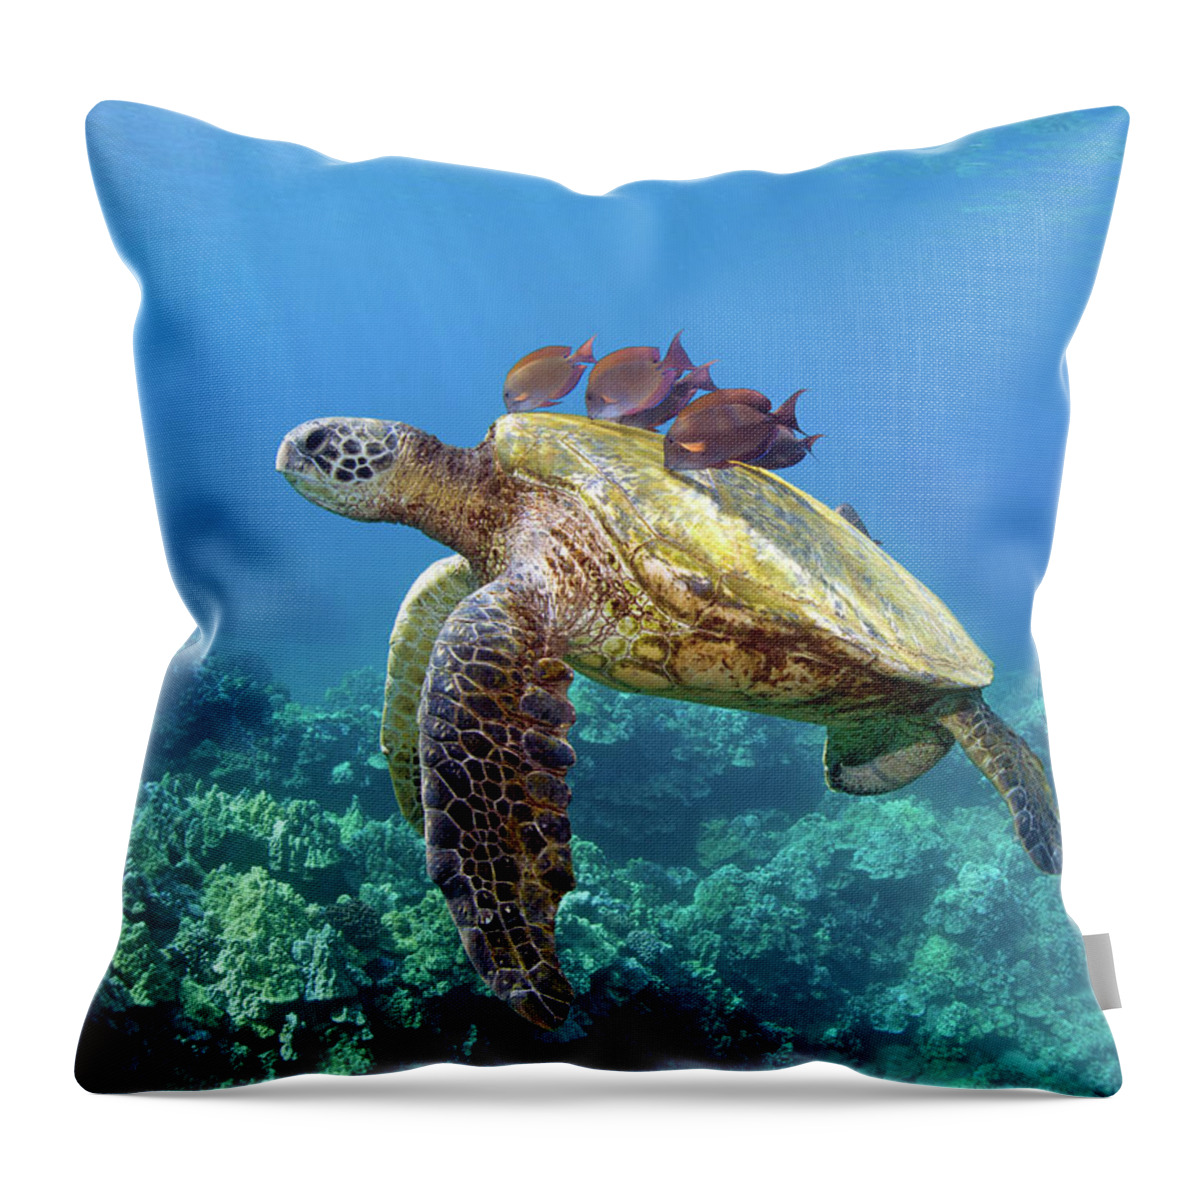 Underwater Throw Pillow featuring the photograph Sea Turtle Underwater by M.m. Sweet